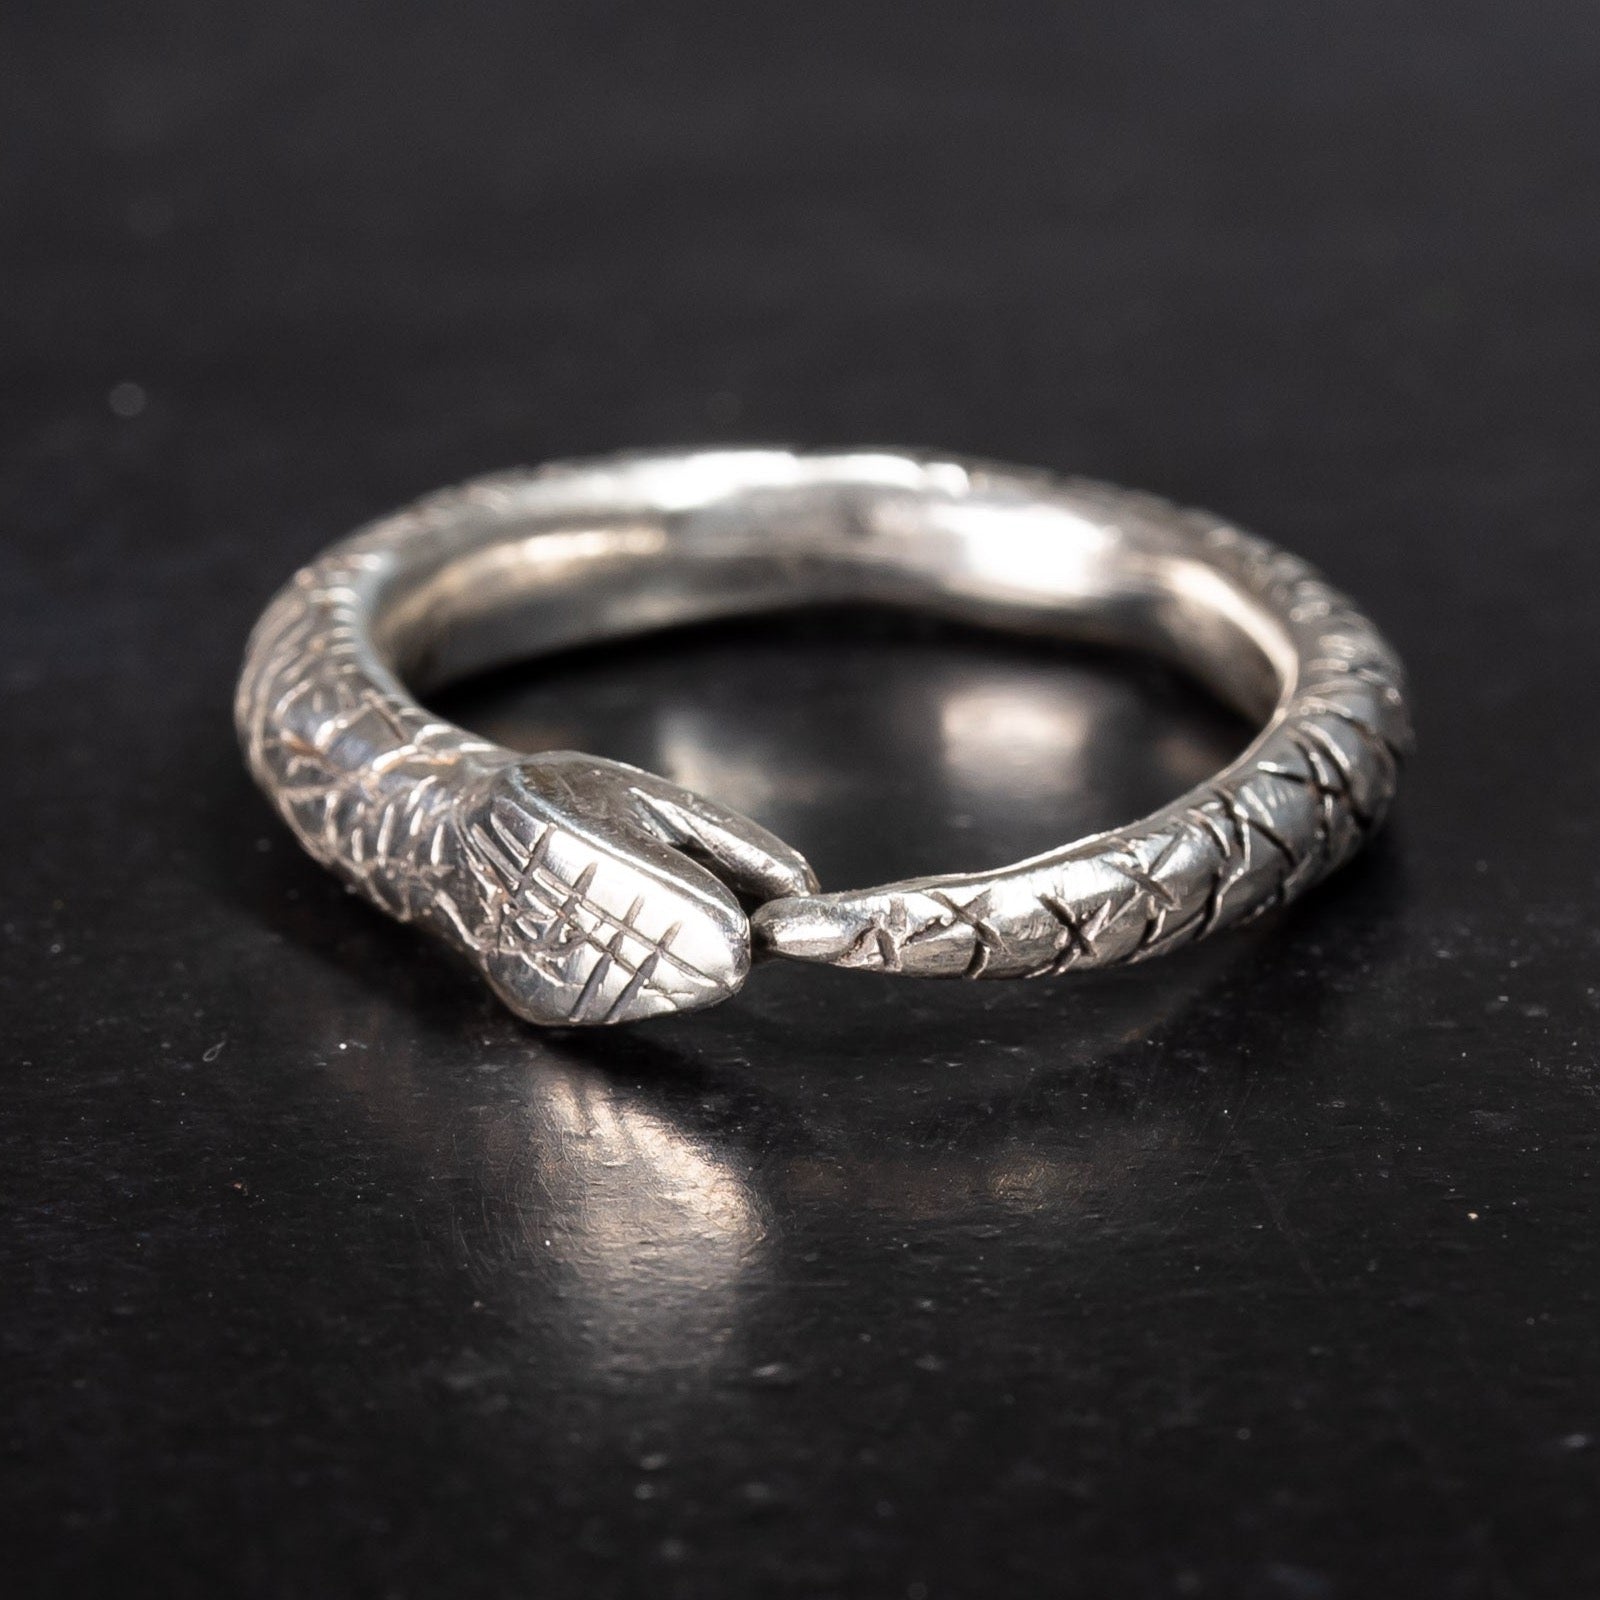 sterling silver snake ring, ouroboros snake eating its own tail on black background